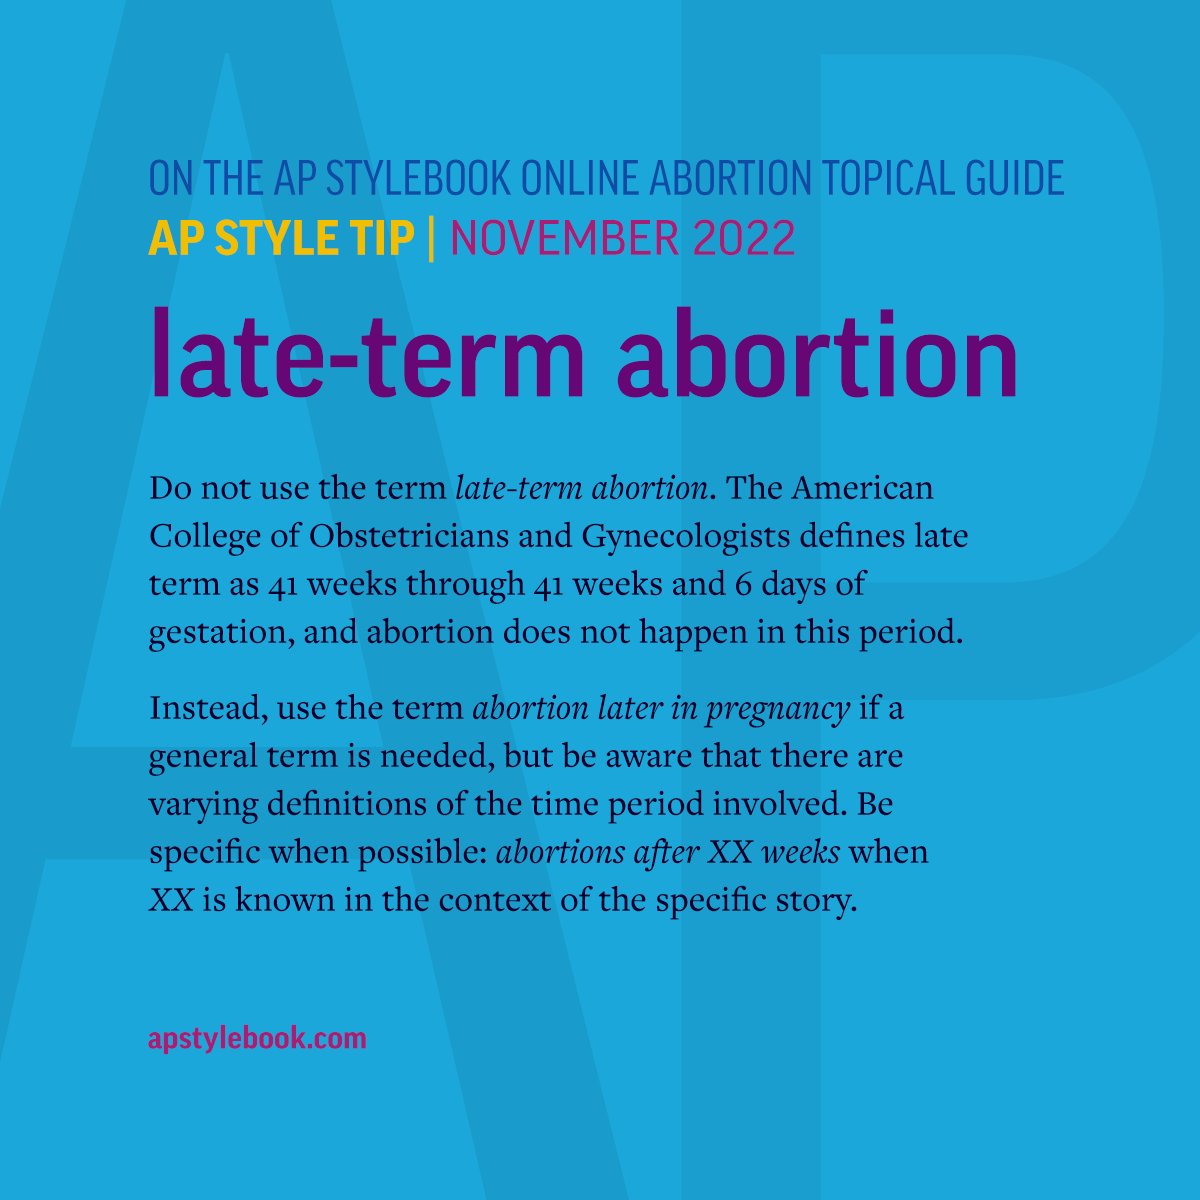 Do not use the term “late-term abortion.” The American College of Obstetricians and Gynecologists defines late term as 41 weeks through 41 weeks and 6 days of gestation, and abortion does not happen in this period.